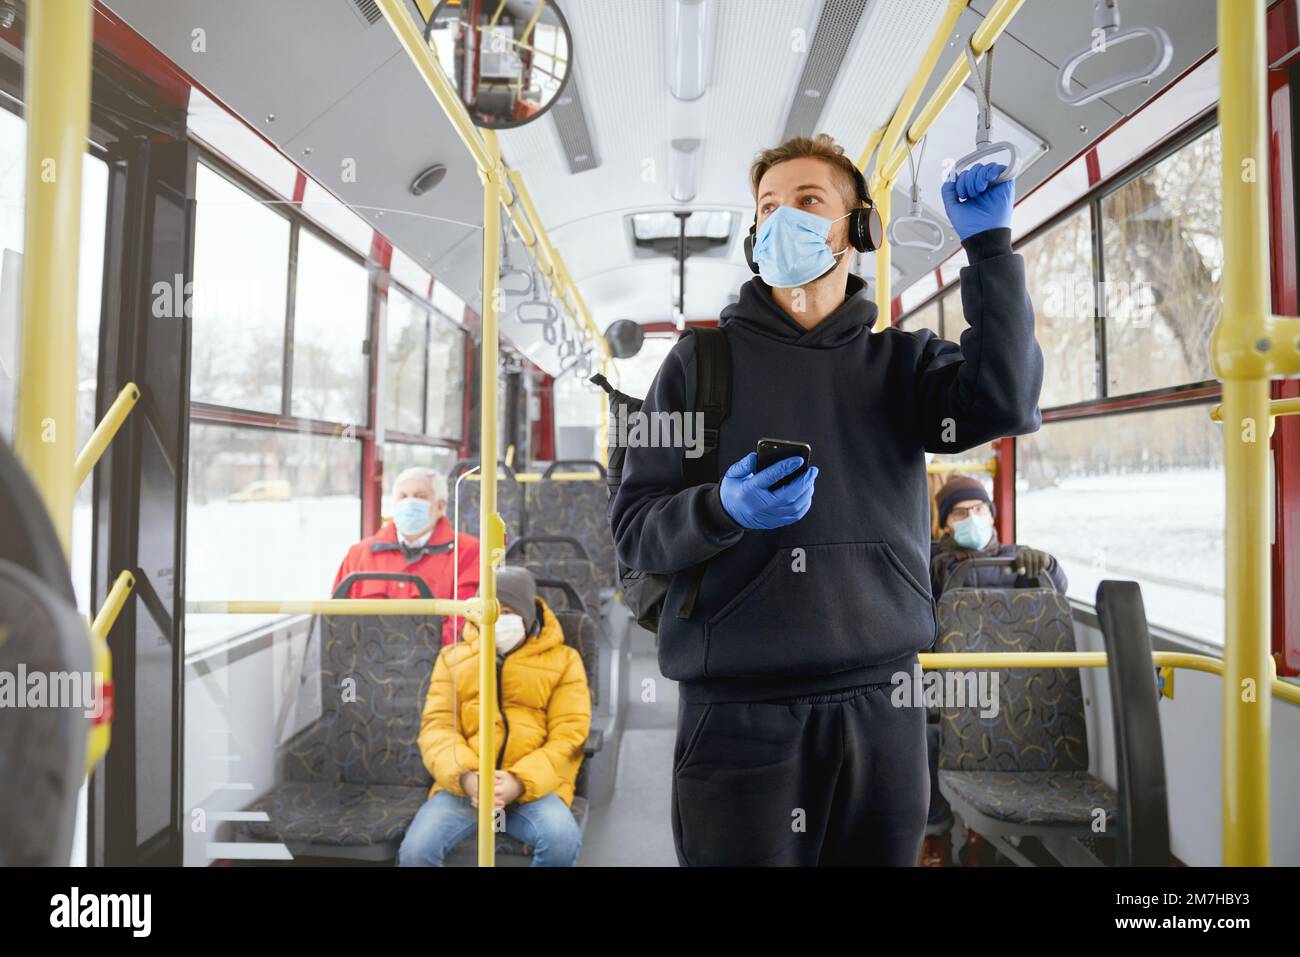 Front view of passengers going home by public transport, standing, sitting, wearing medical masks and gloves. Young man holding smartphone, paying. Concept of urban life. Stock Photo